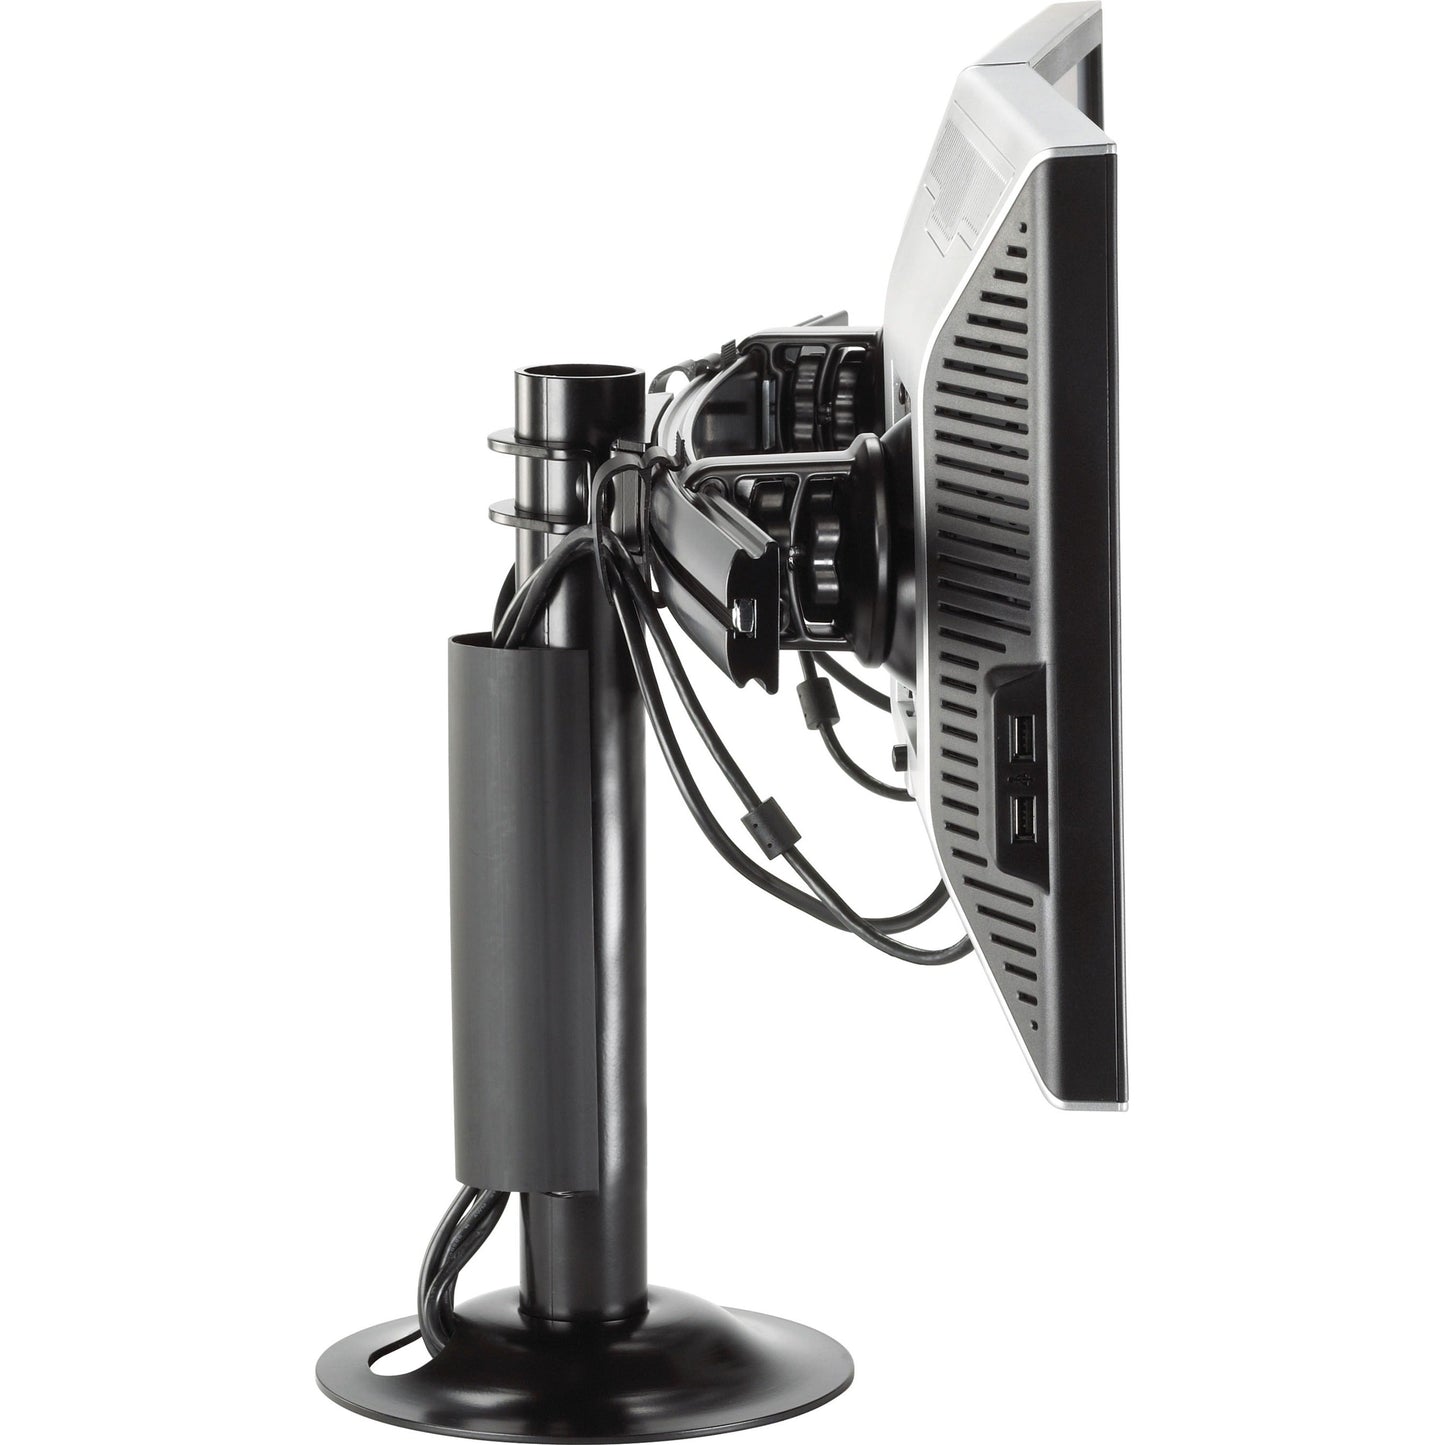 Chief Vertical Bolt-Down Dual Monitor Mount - For Small Flat Panel Displays - Black